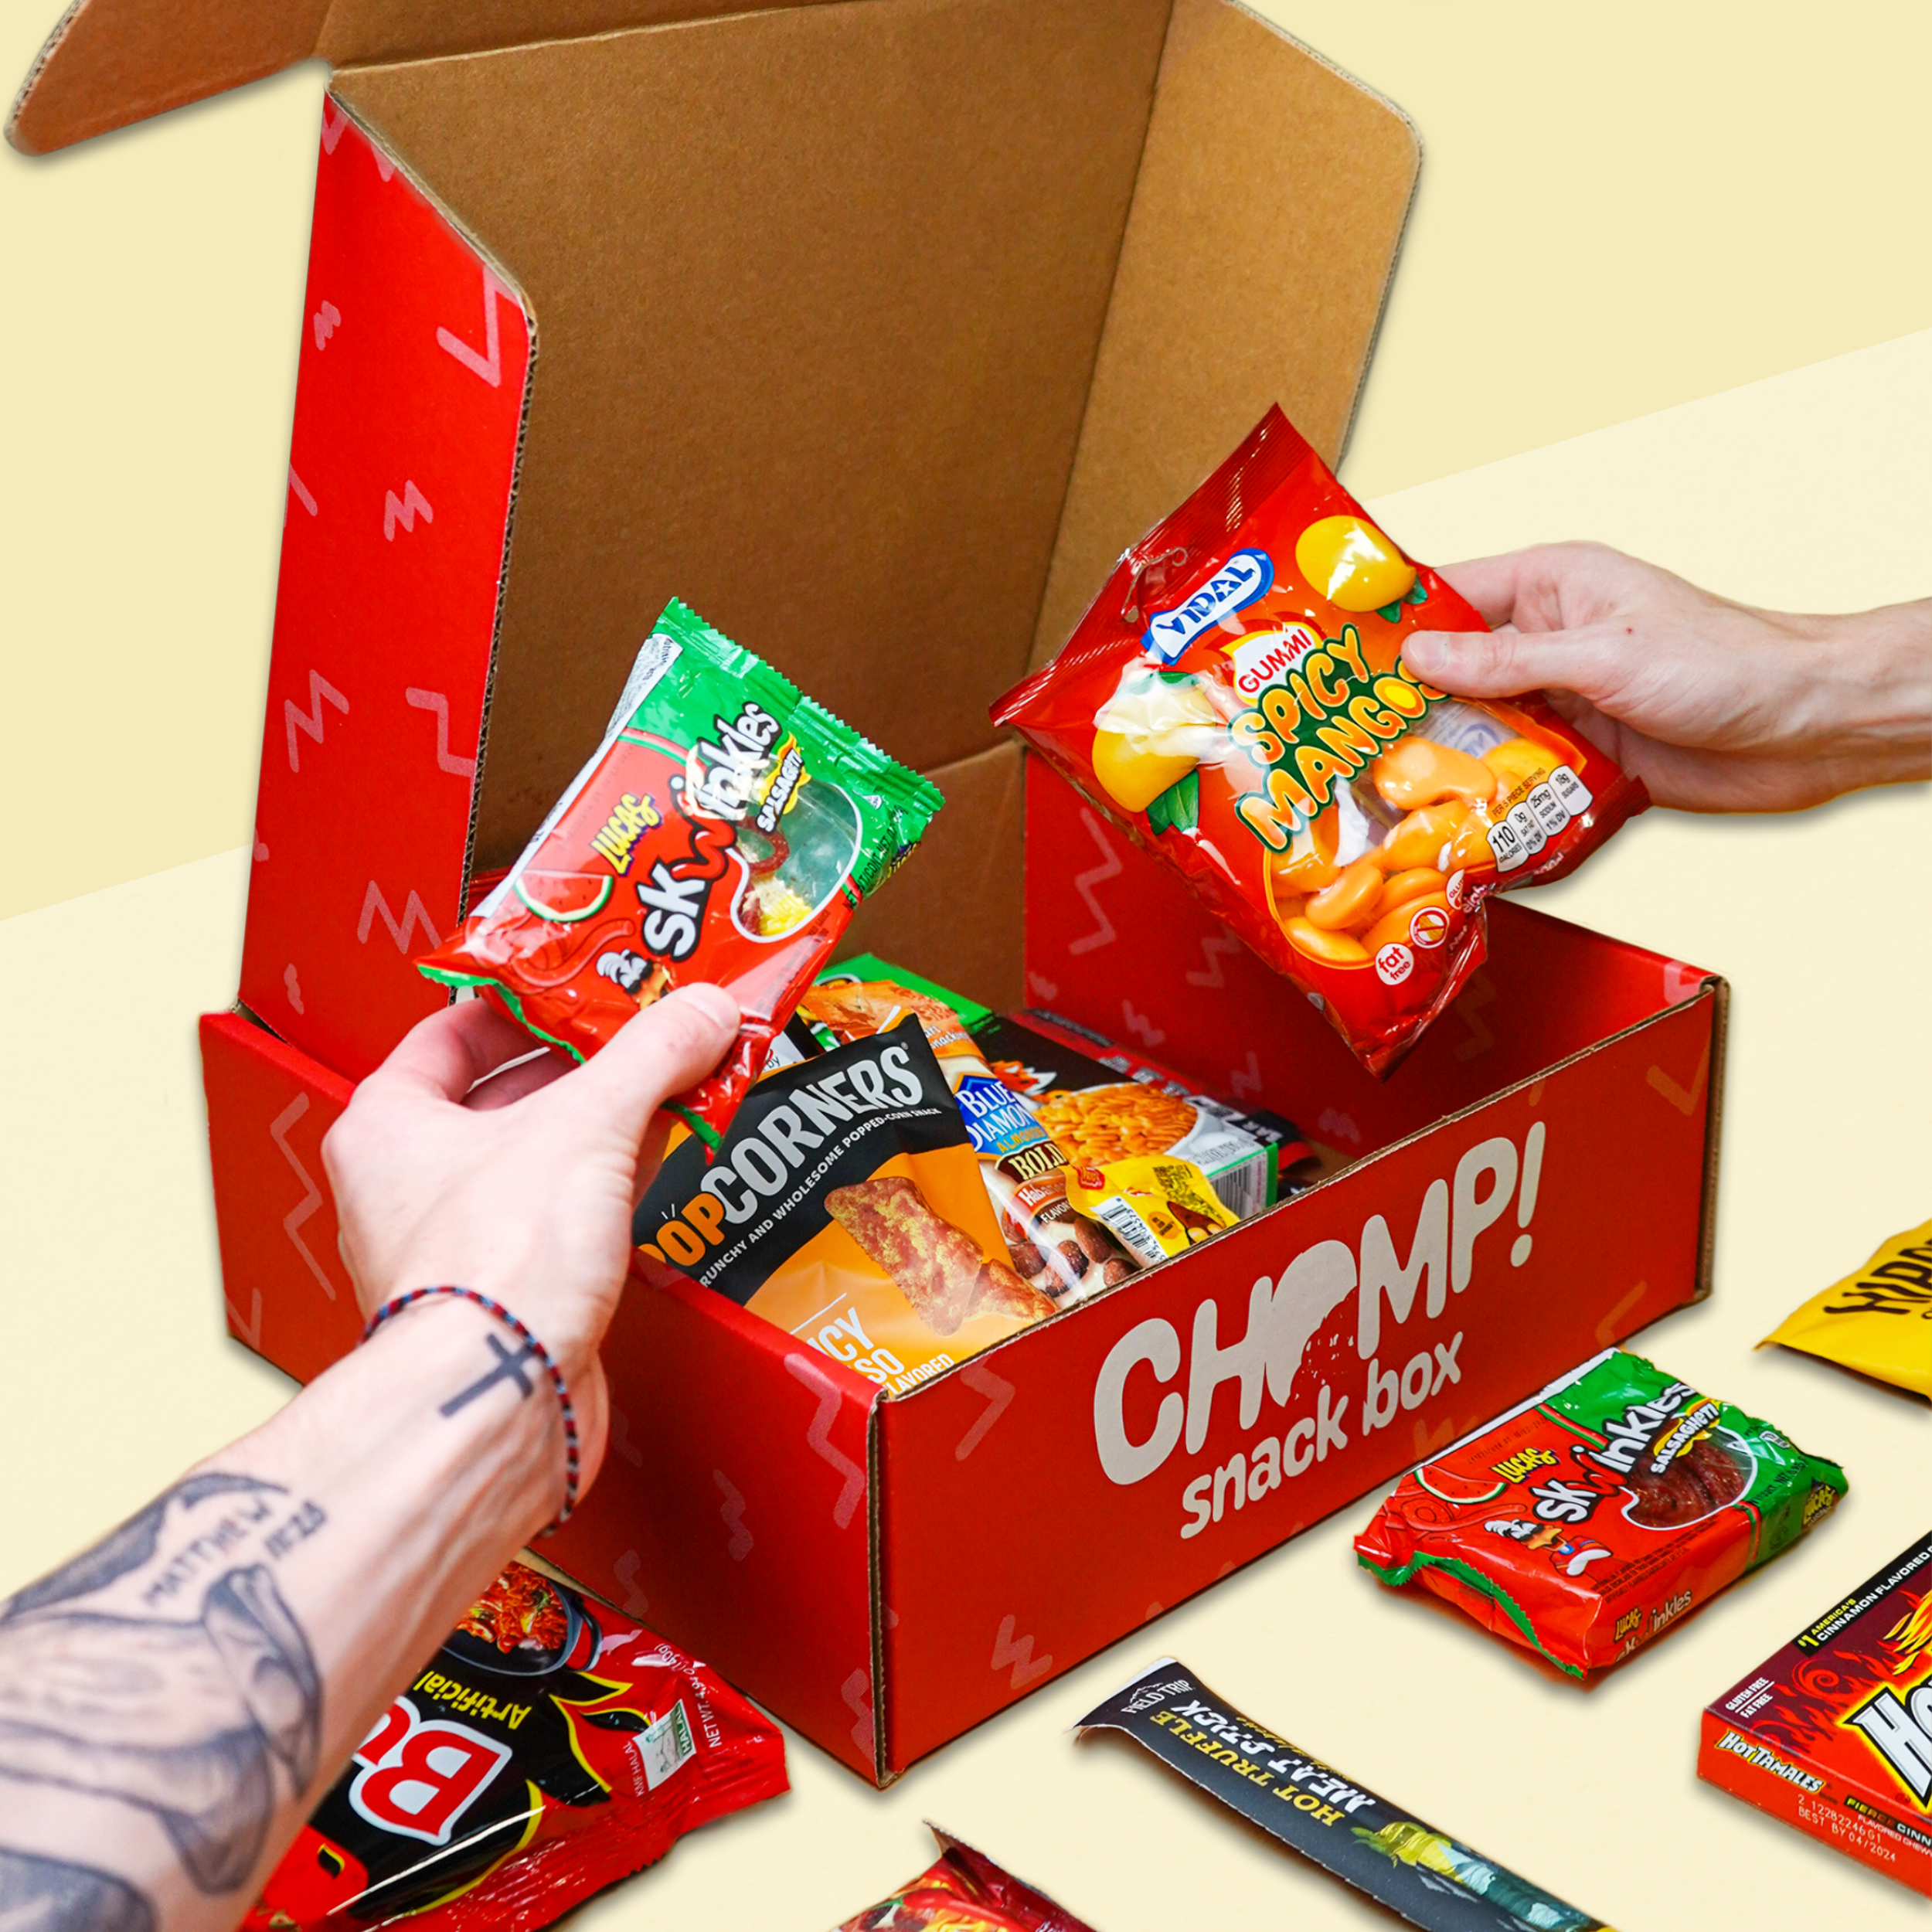 Chomp Spicy Snack Box Subscription